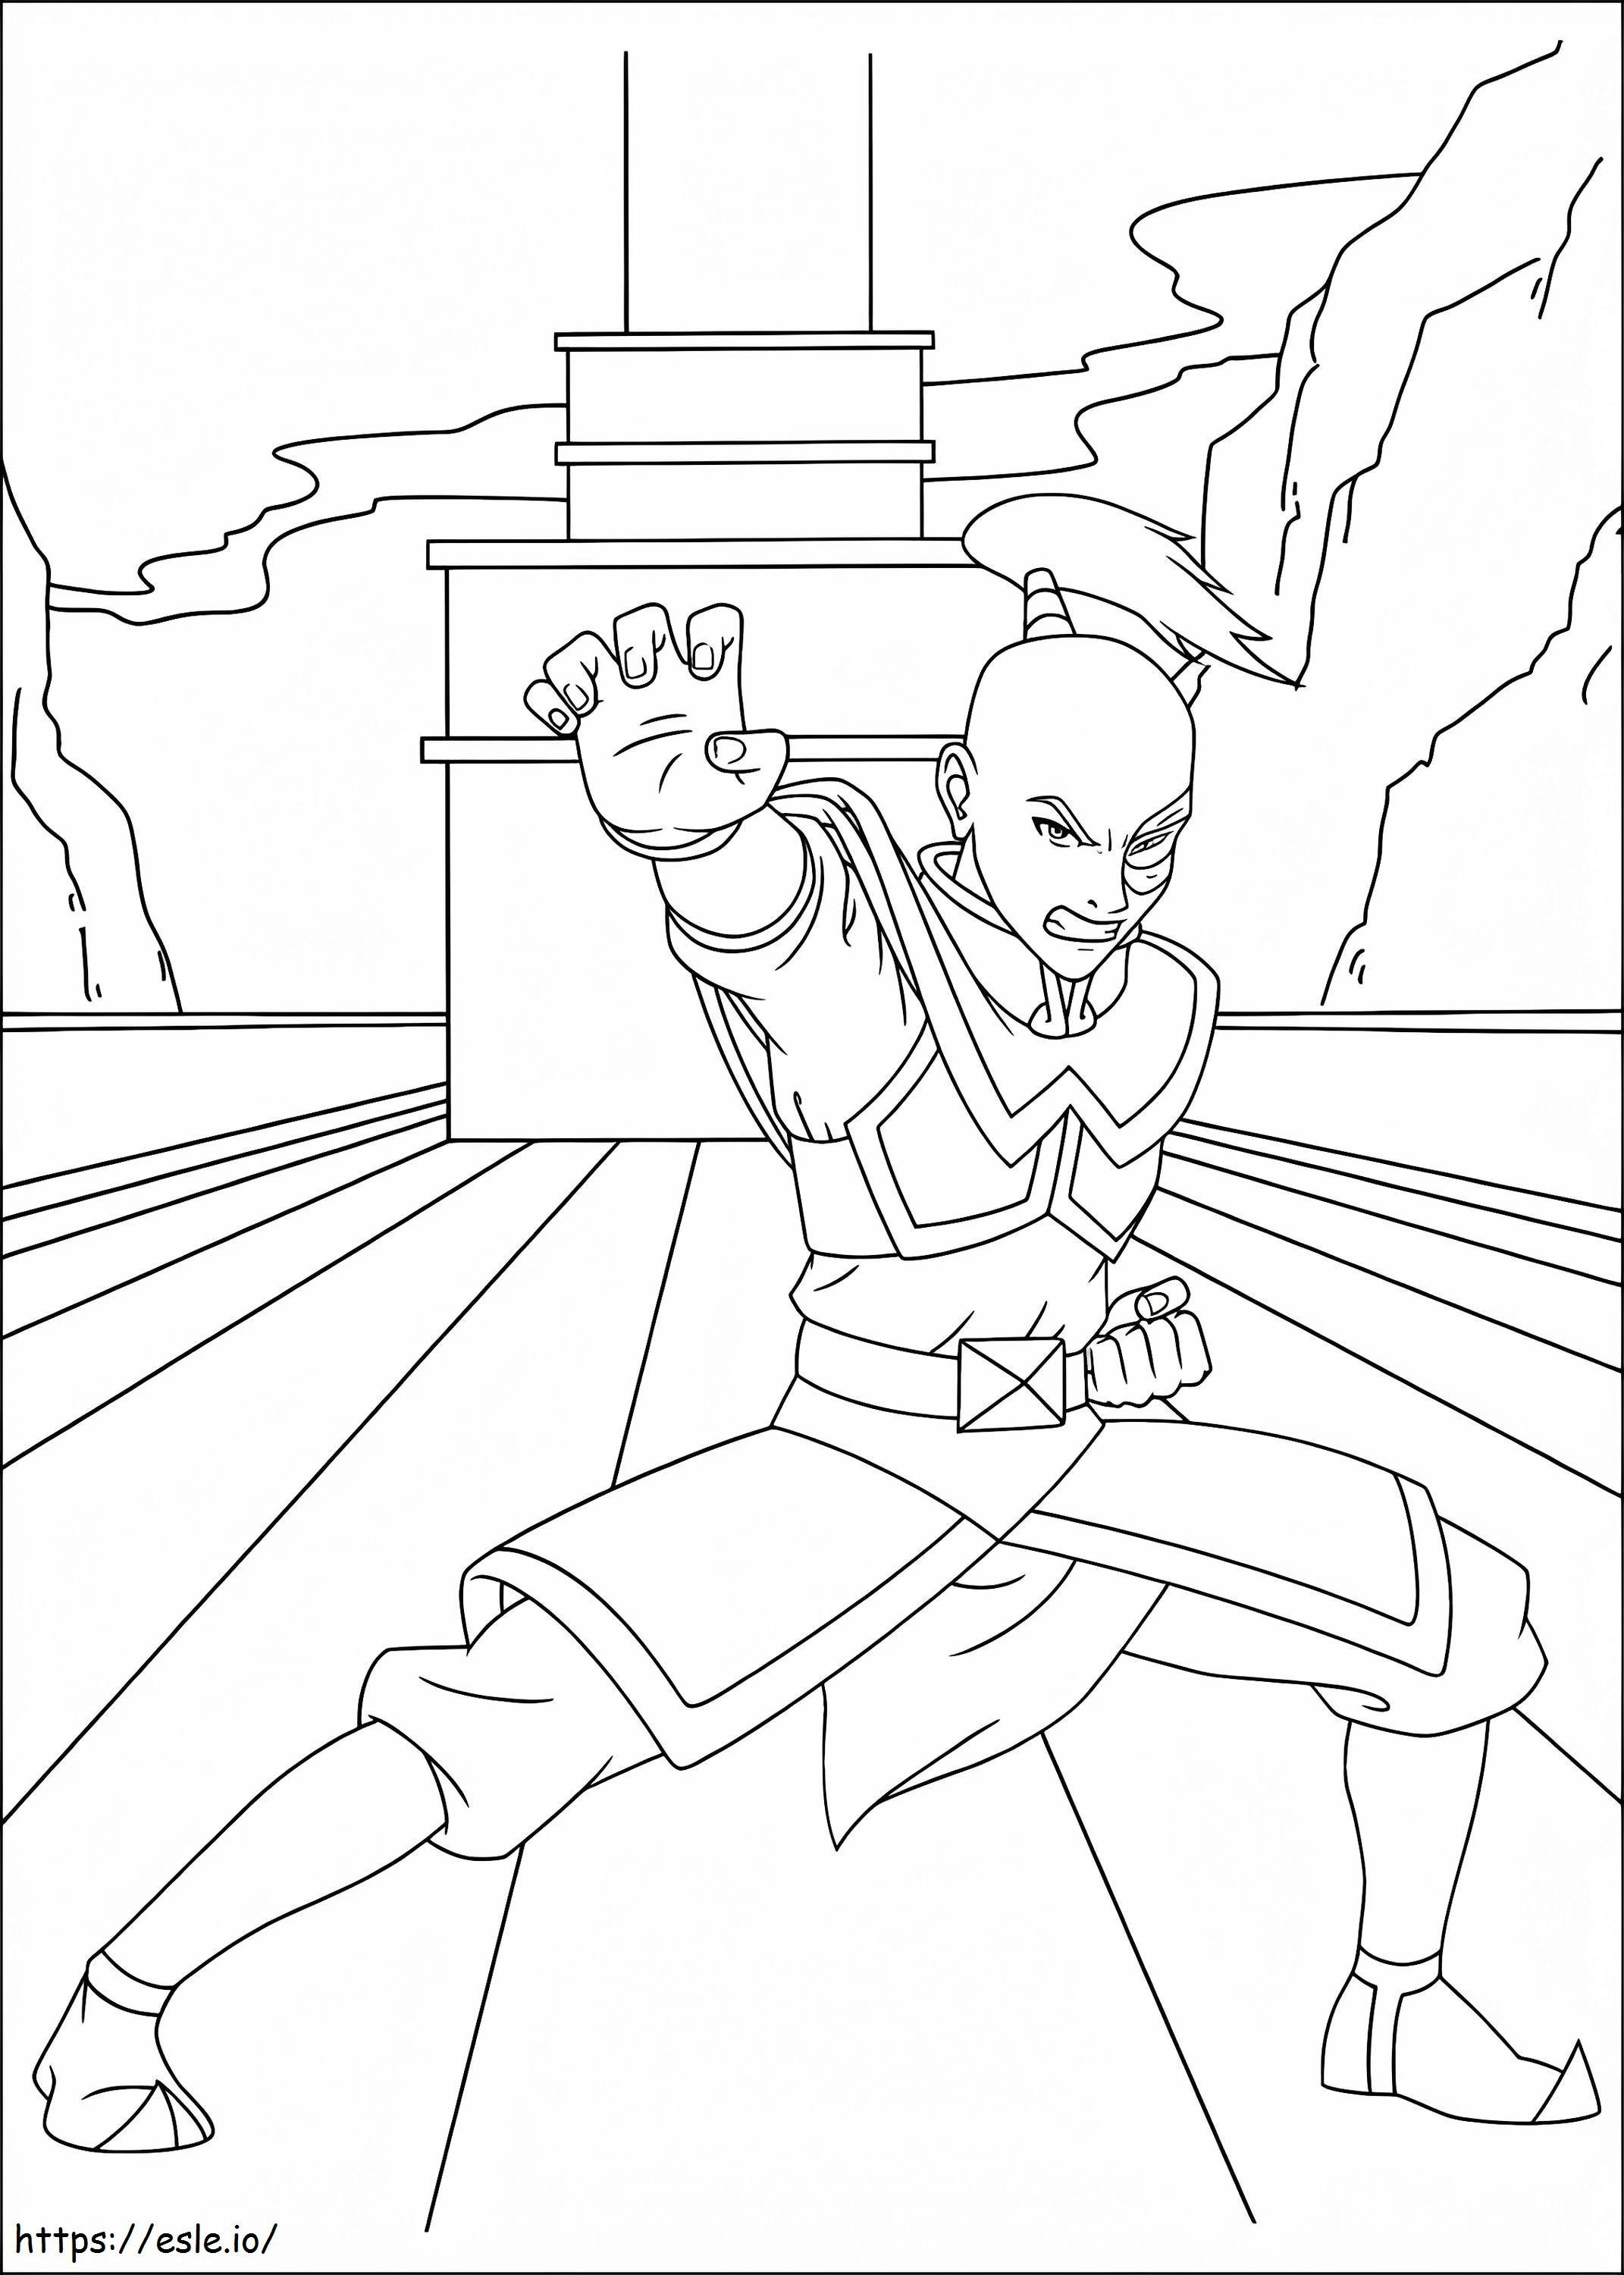 1533614193 Angry Prince Zuko A4 coloring page